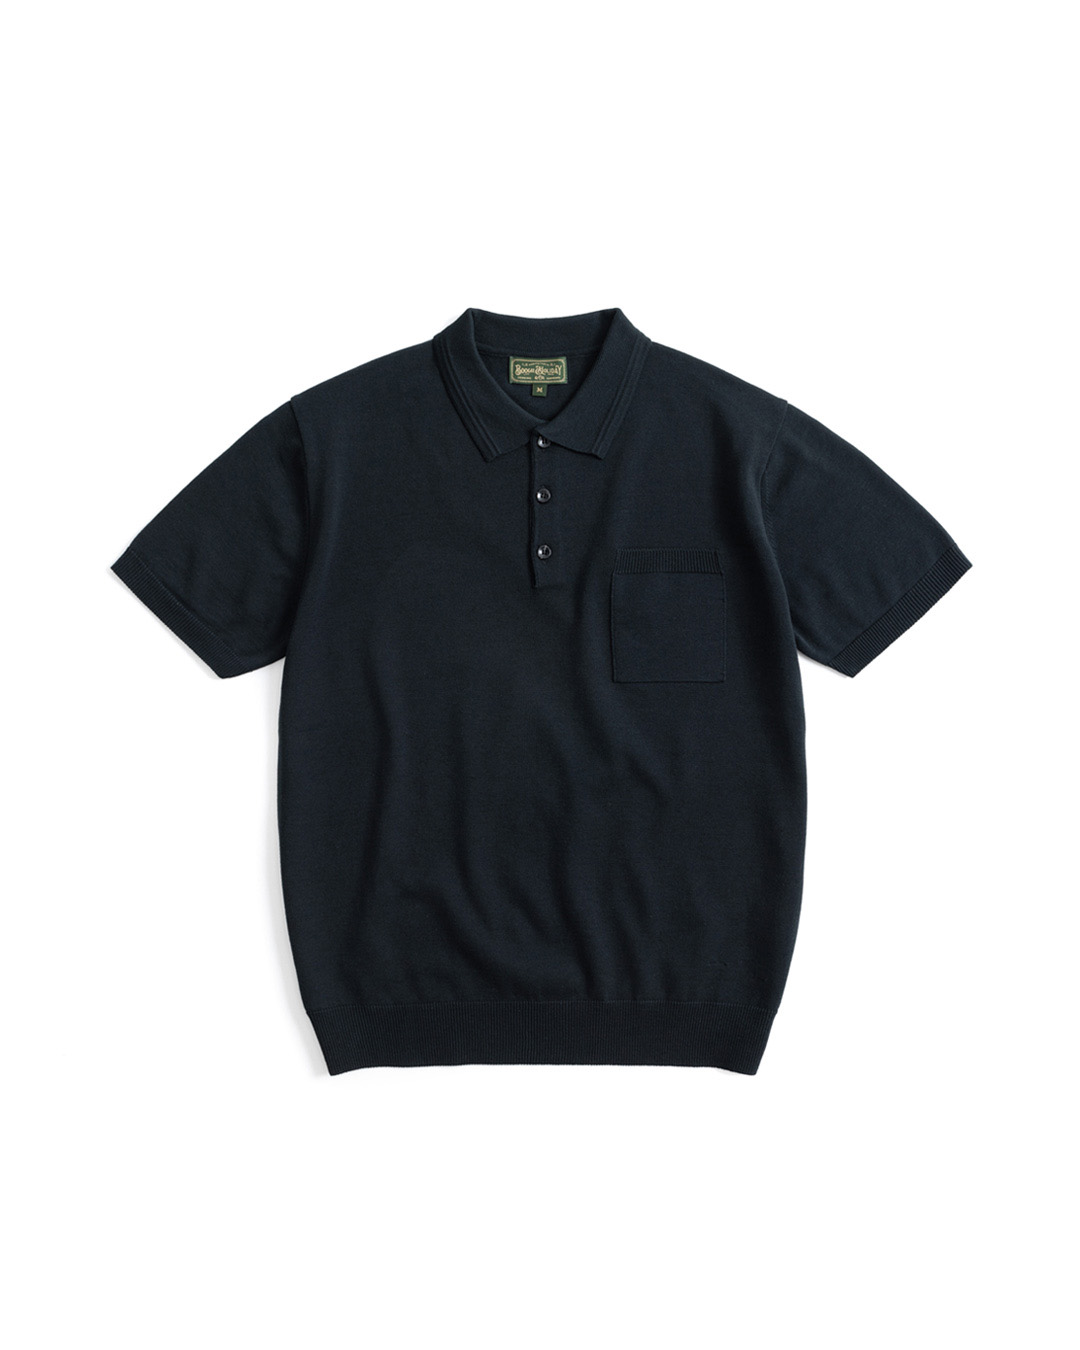 05 KNITTED POLO SHIRT (black)